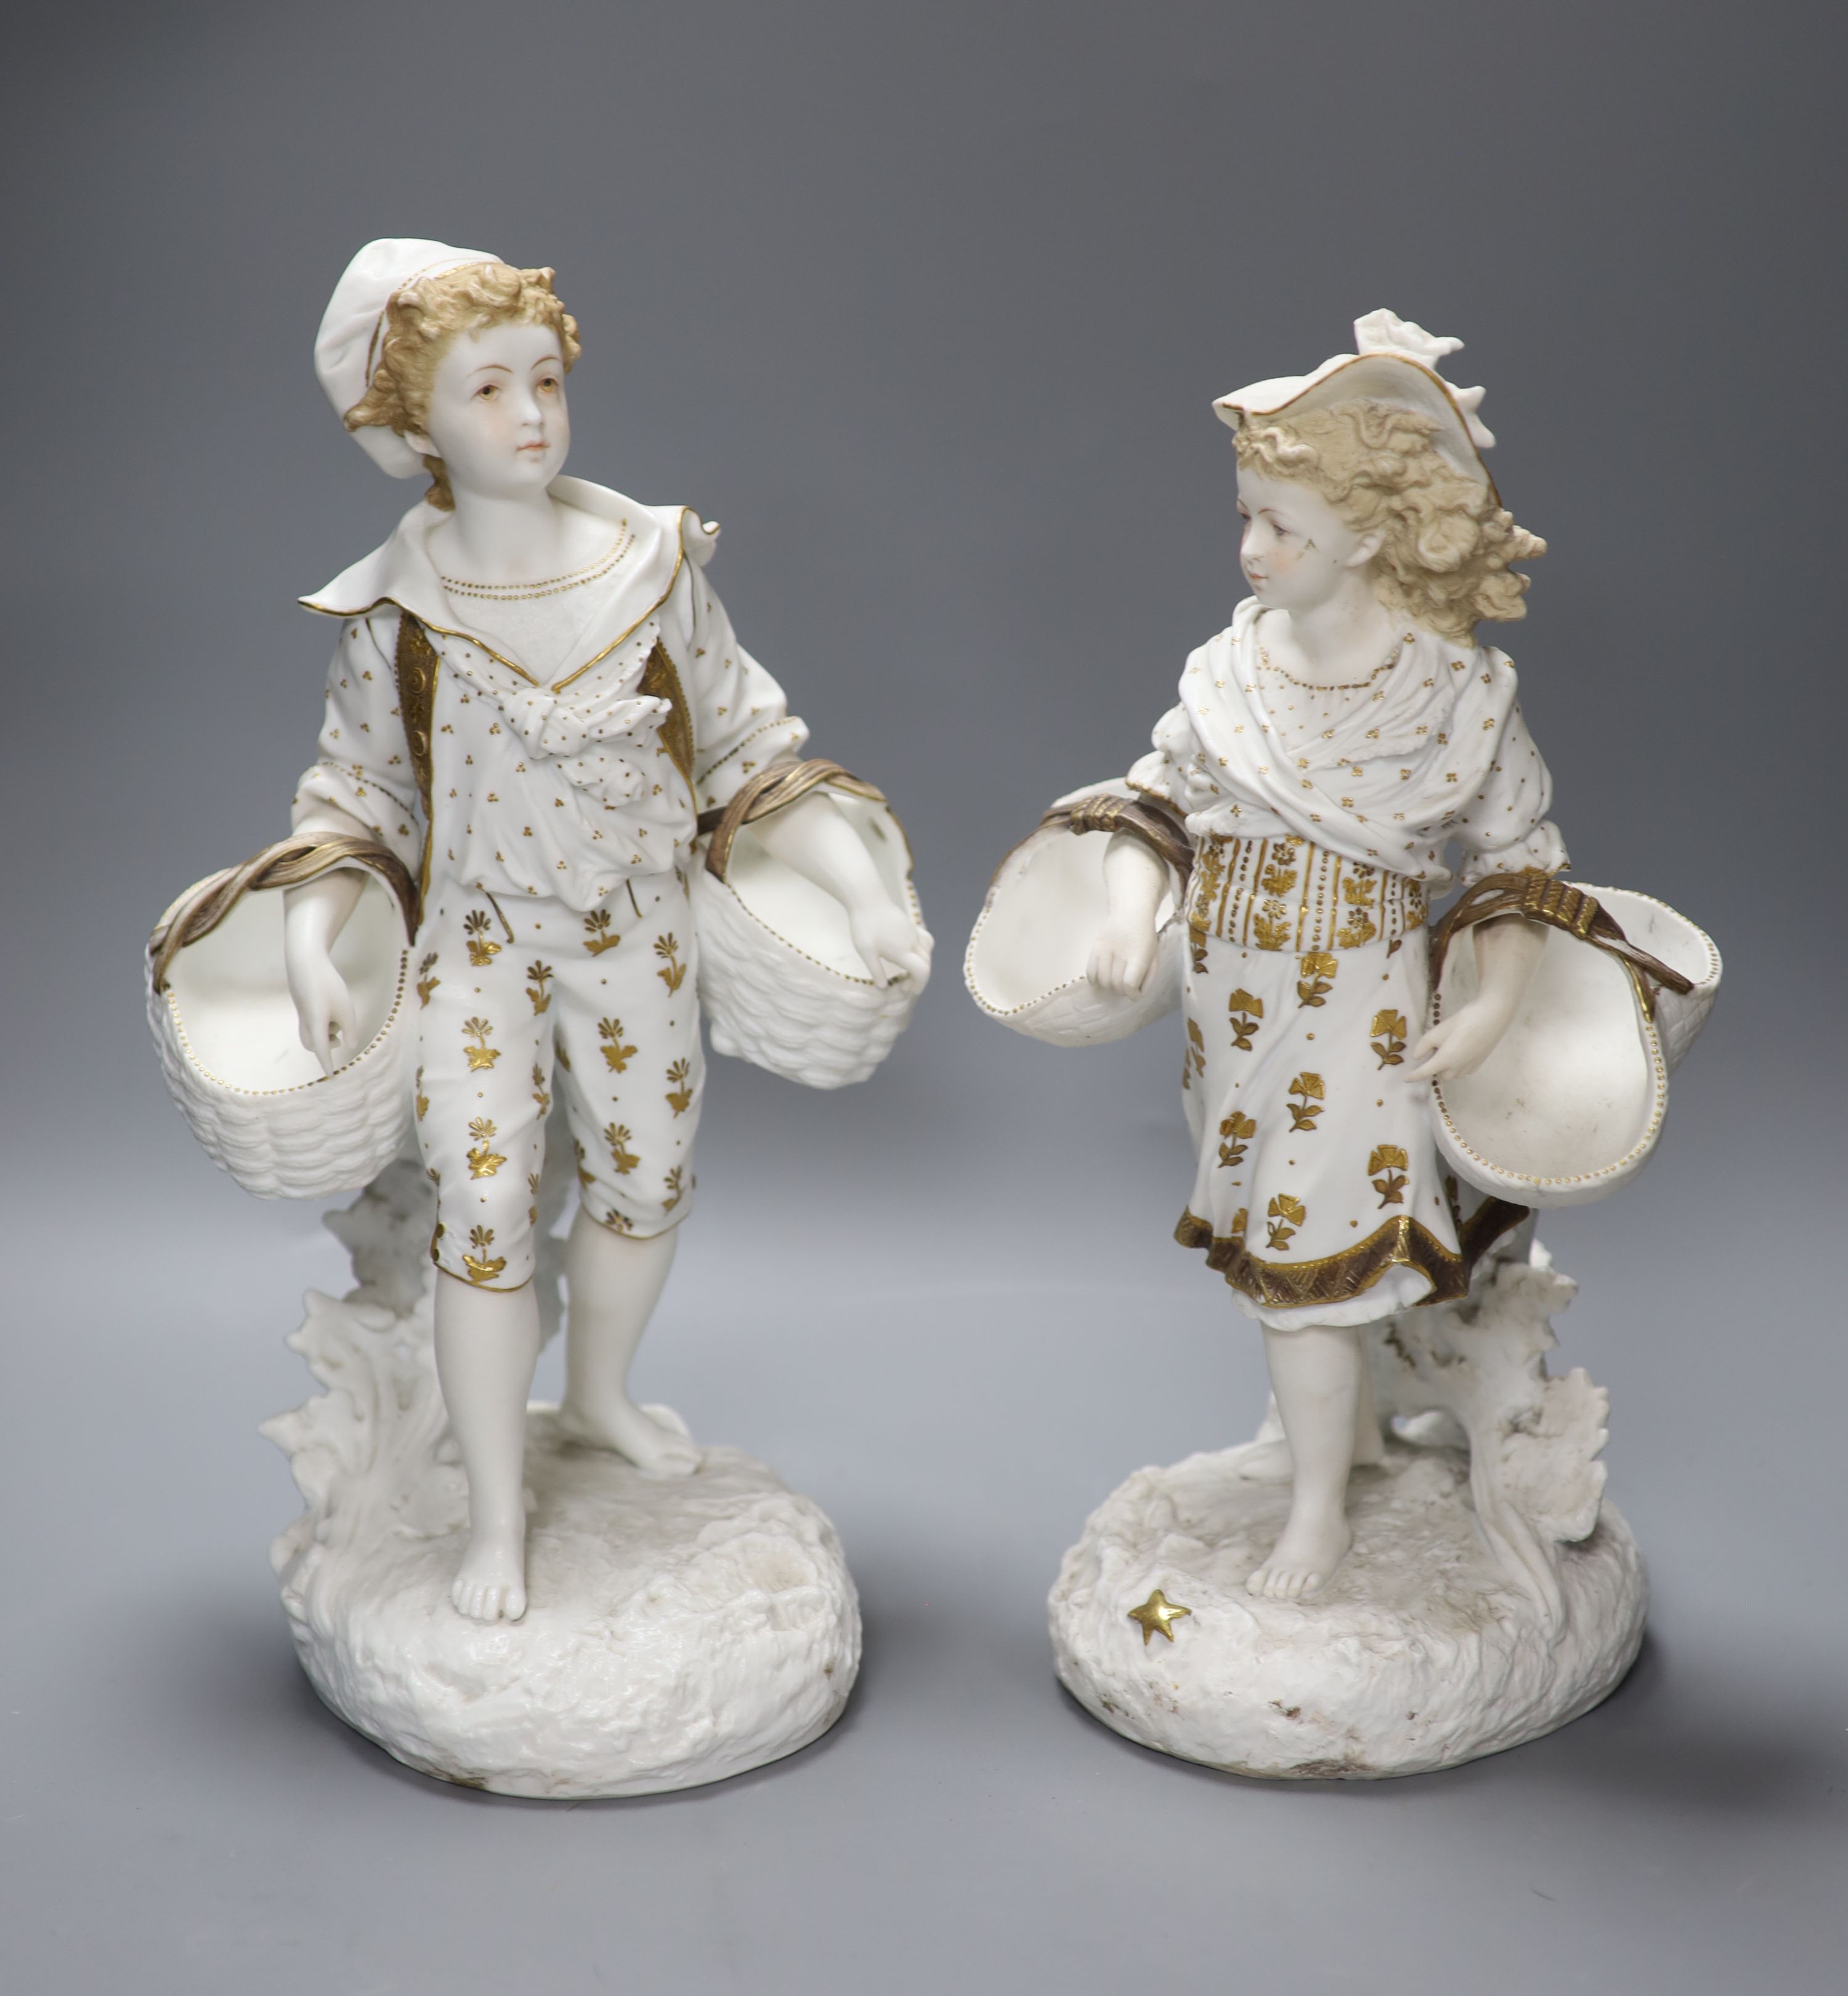 A pair of 19th century bisque gilt painted and decorated figures of a peasant boy and girl carrying baskets, 36cm